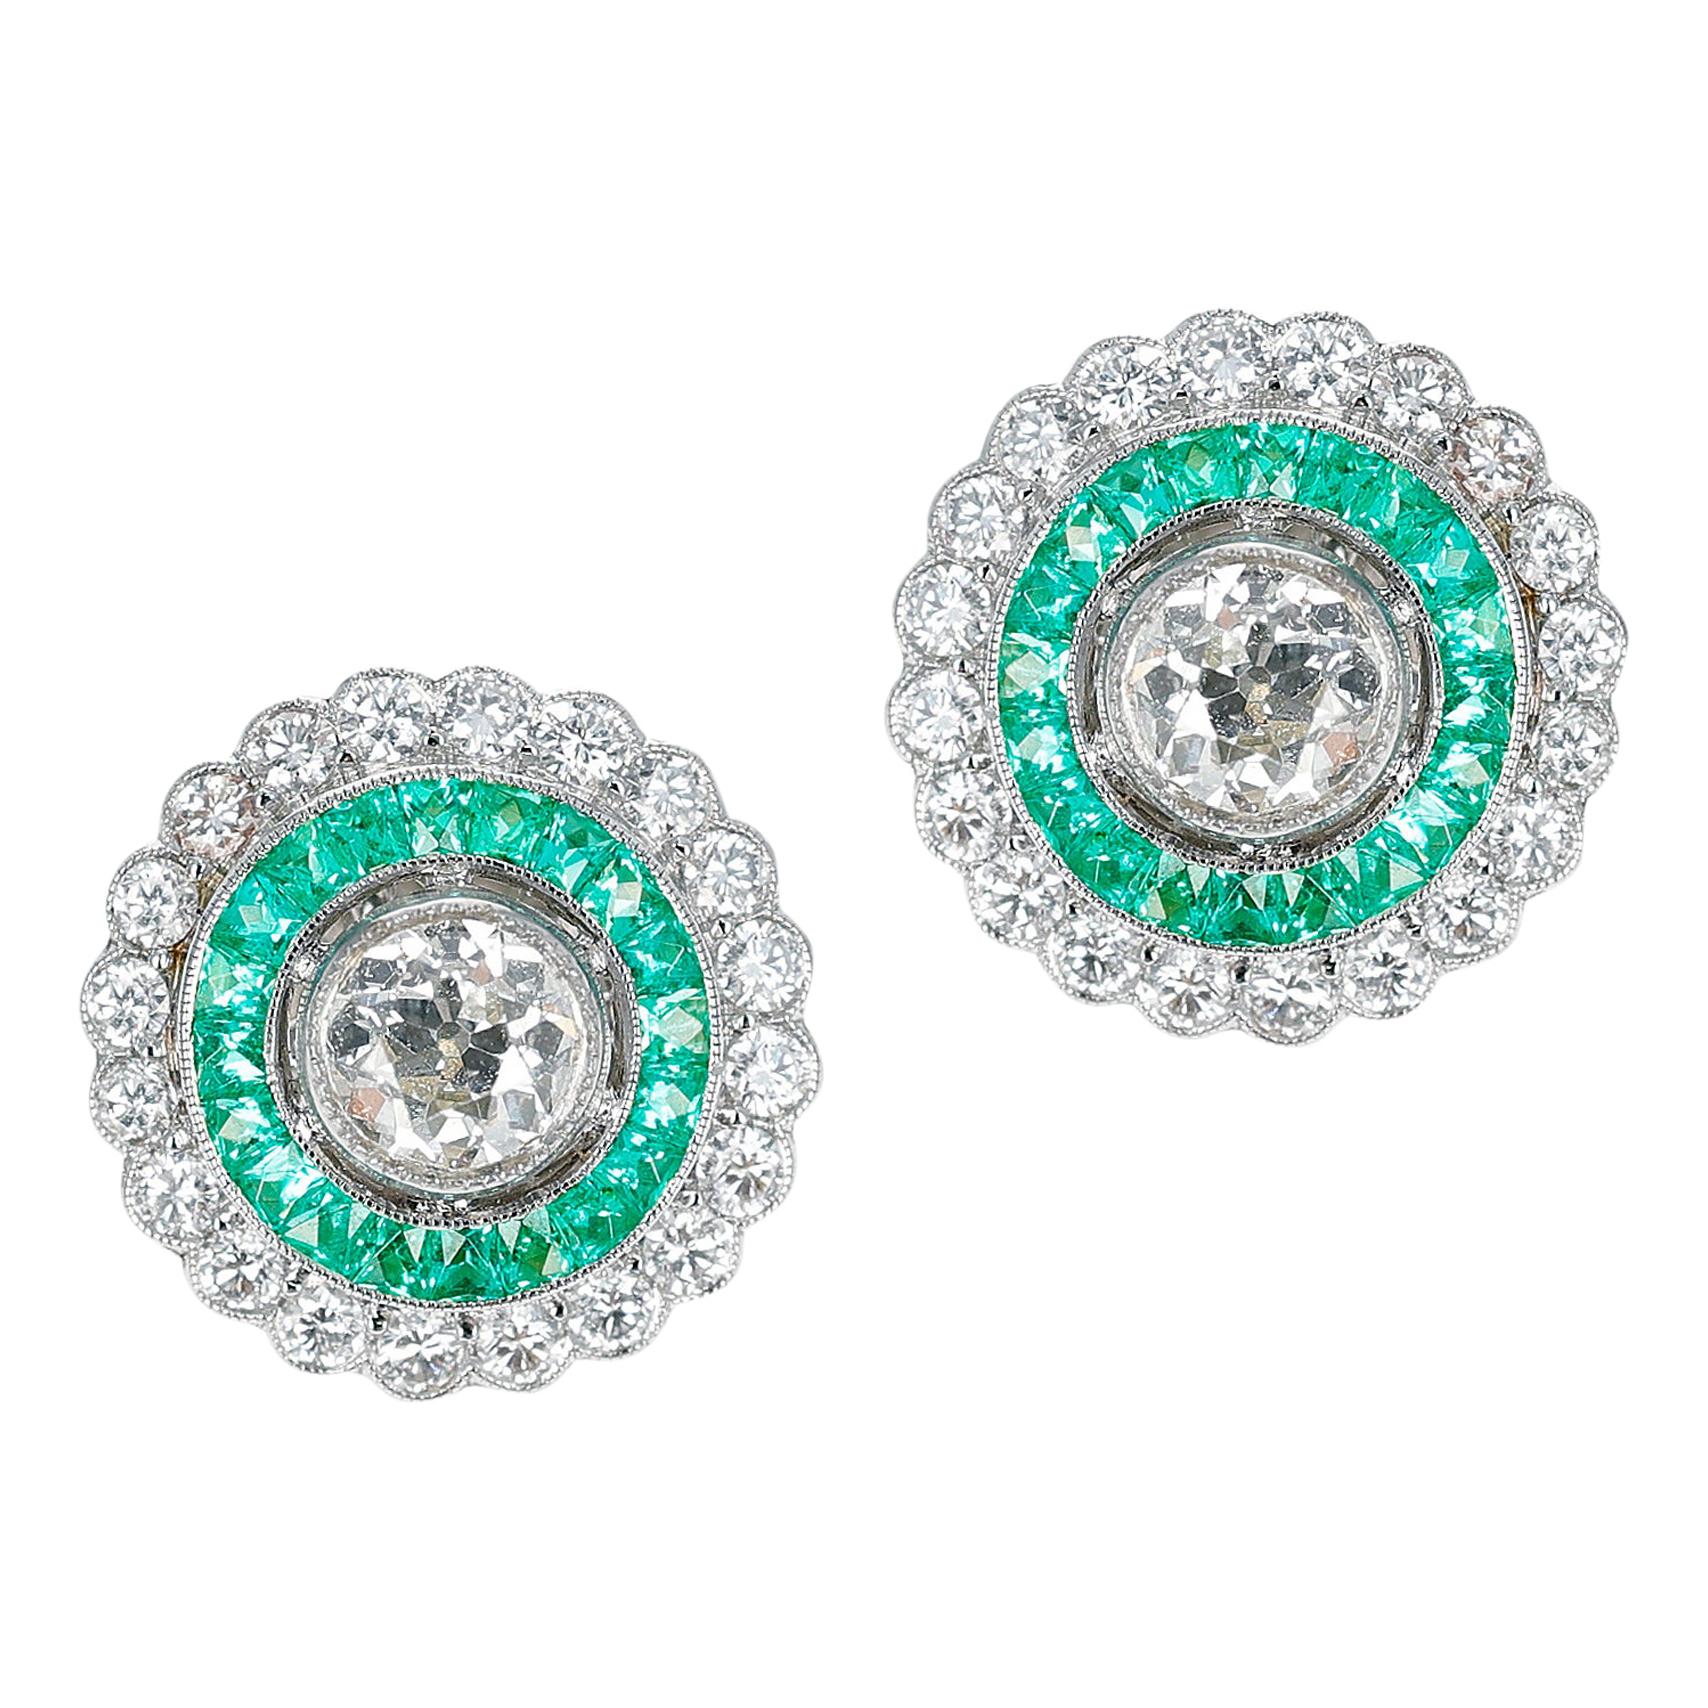 Art Deco Style 0.70 Ct. Each Diamond and Invisibly Set Emerald Earrings, Platinum